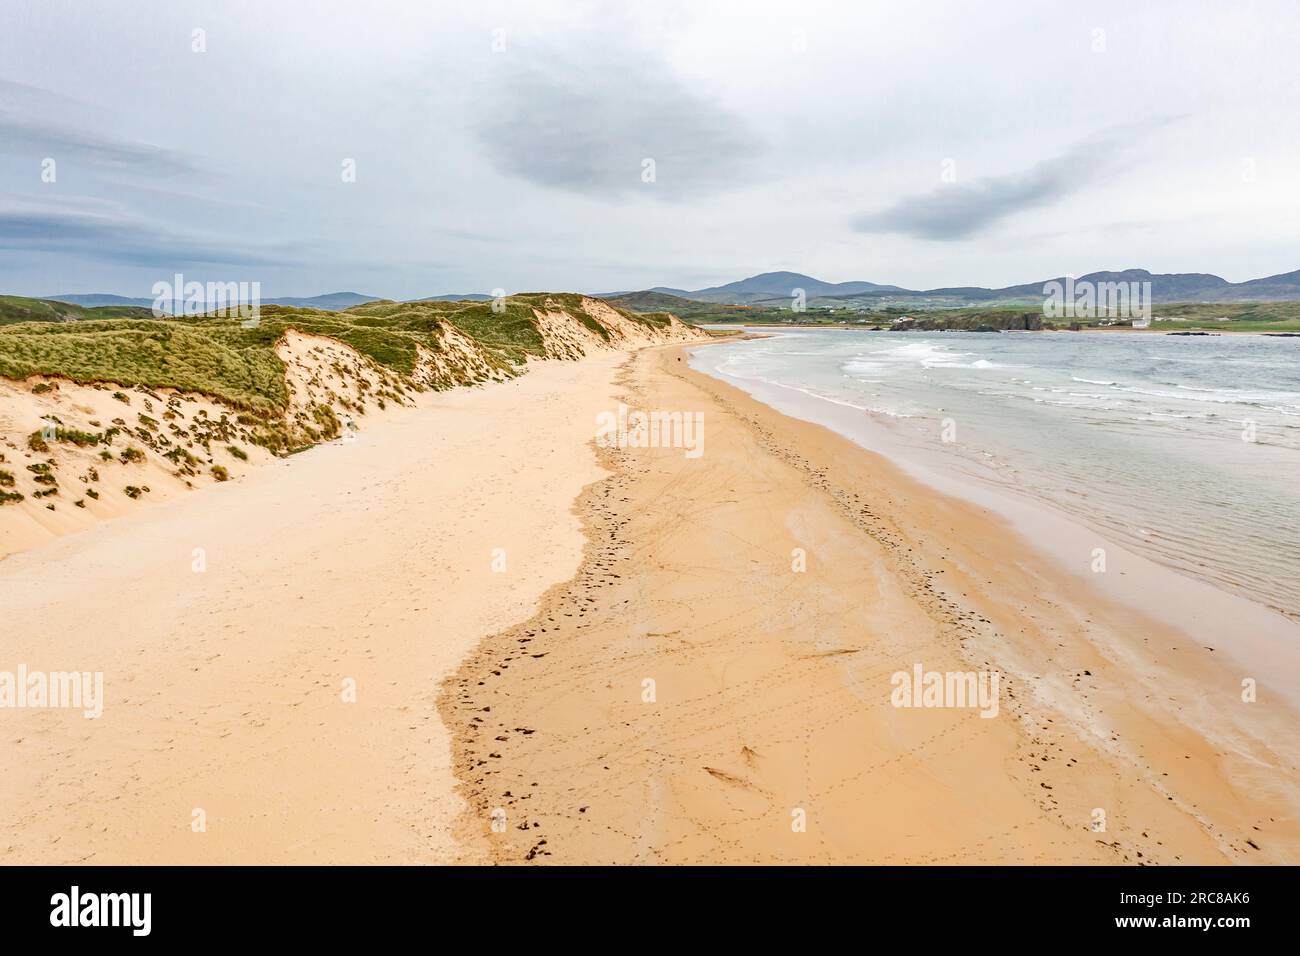 Aerial view of the Five Fingers Strand in County Donegal, Ireland. Stock Photo